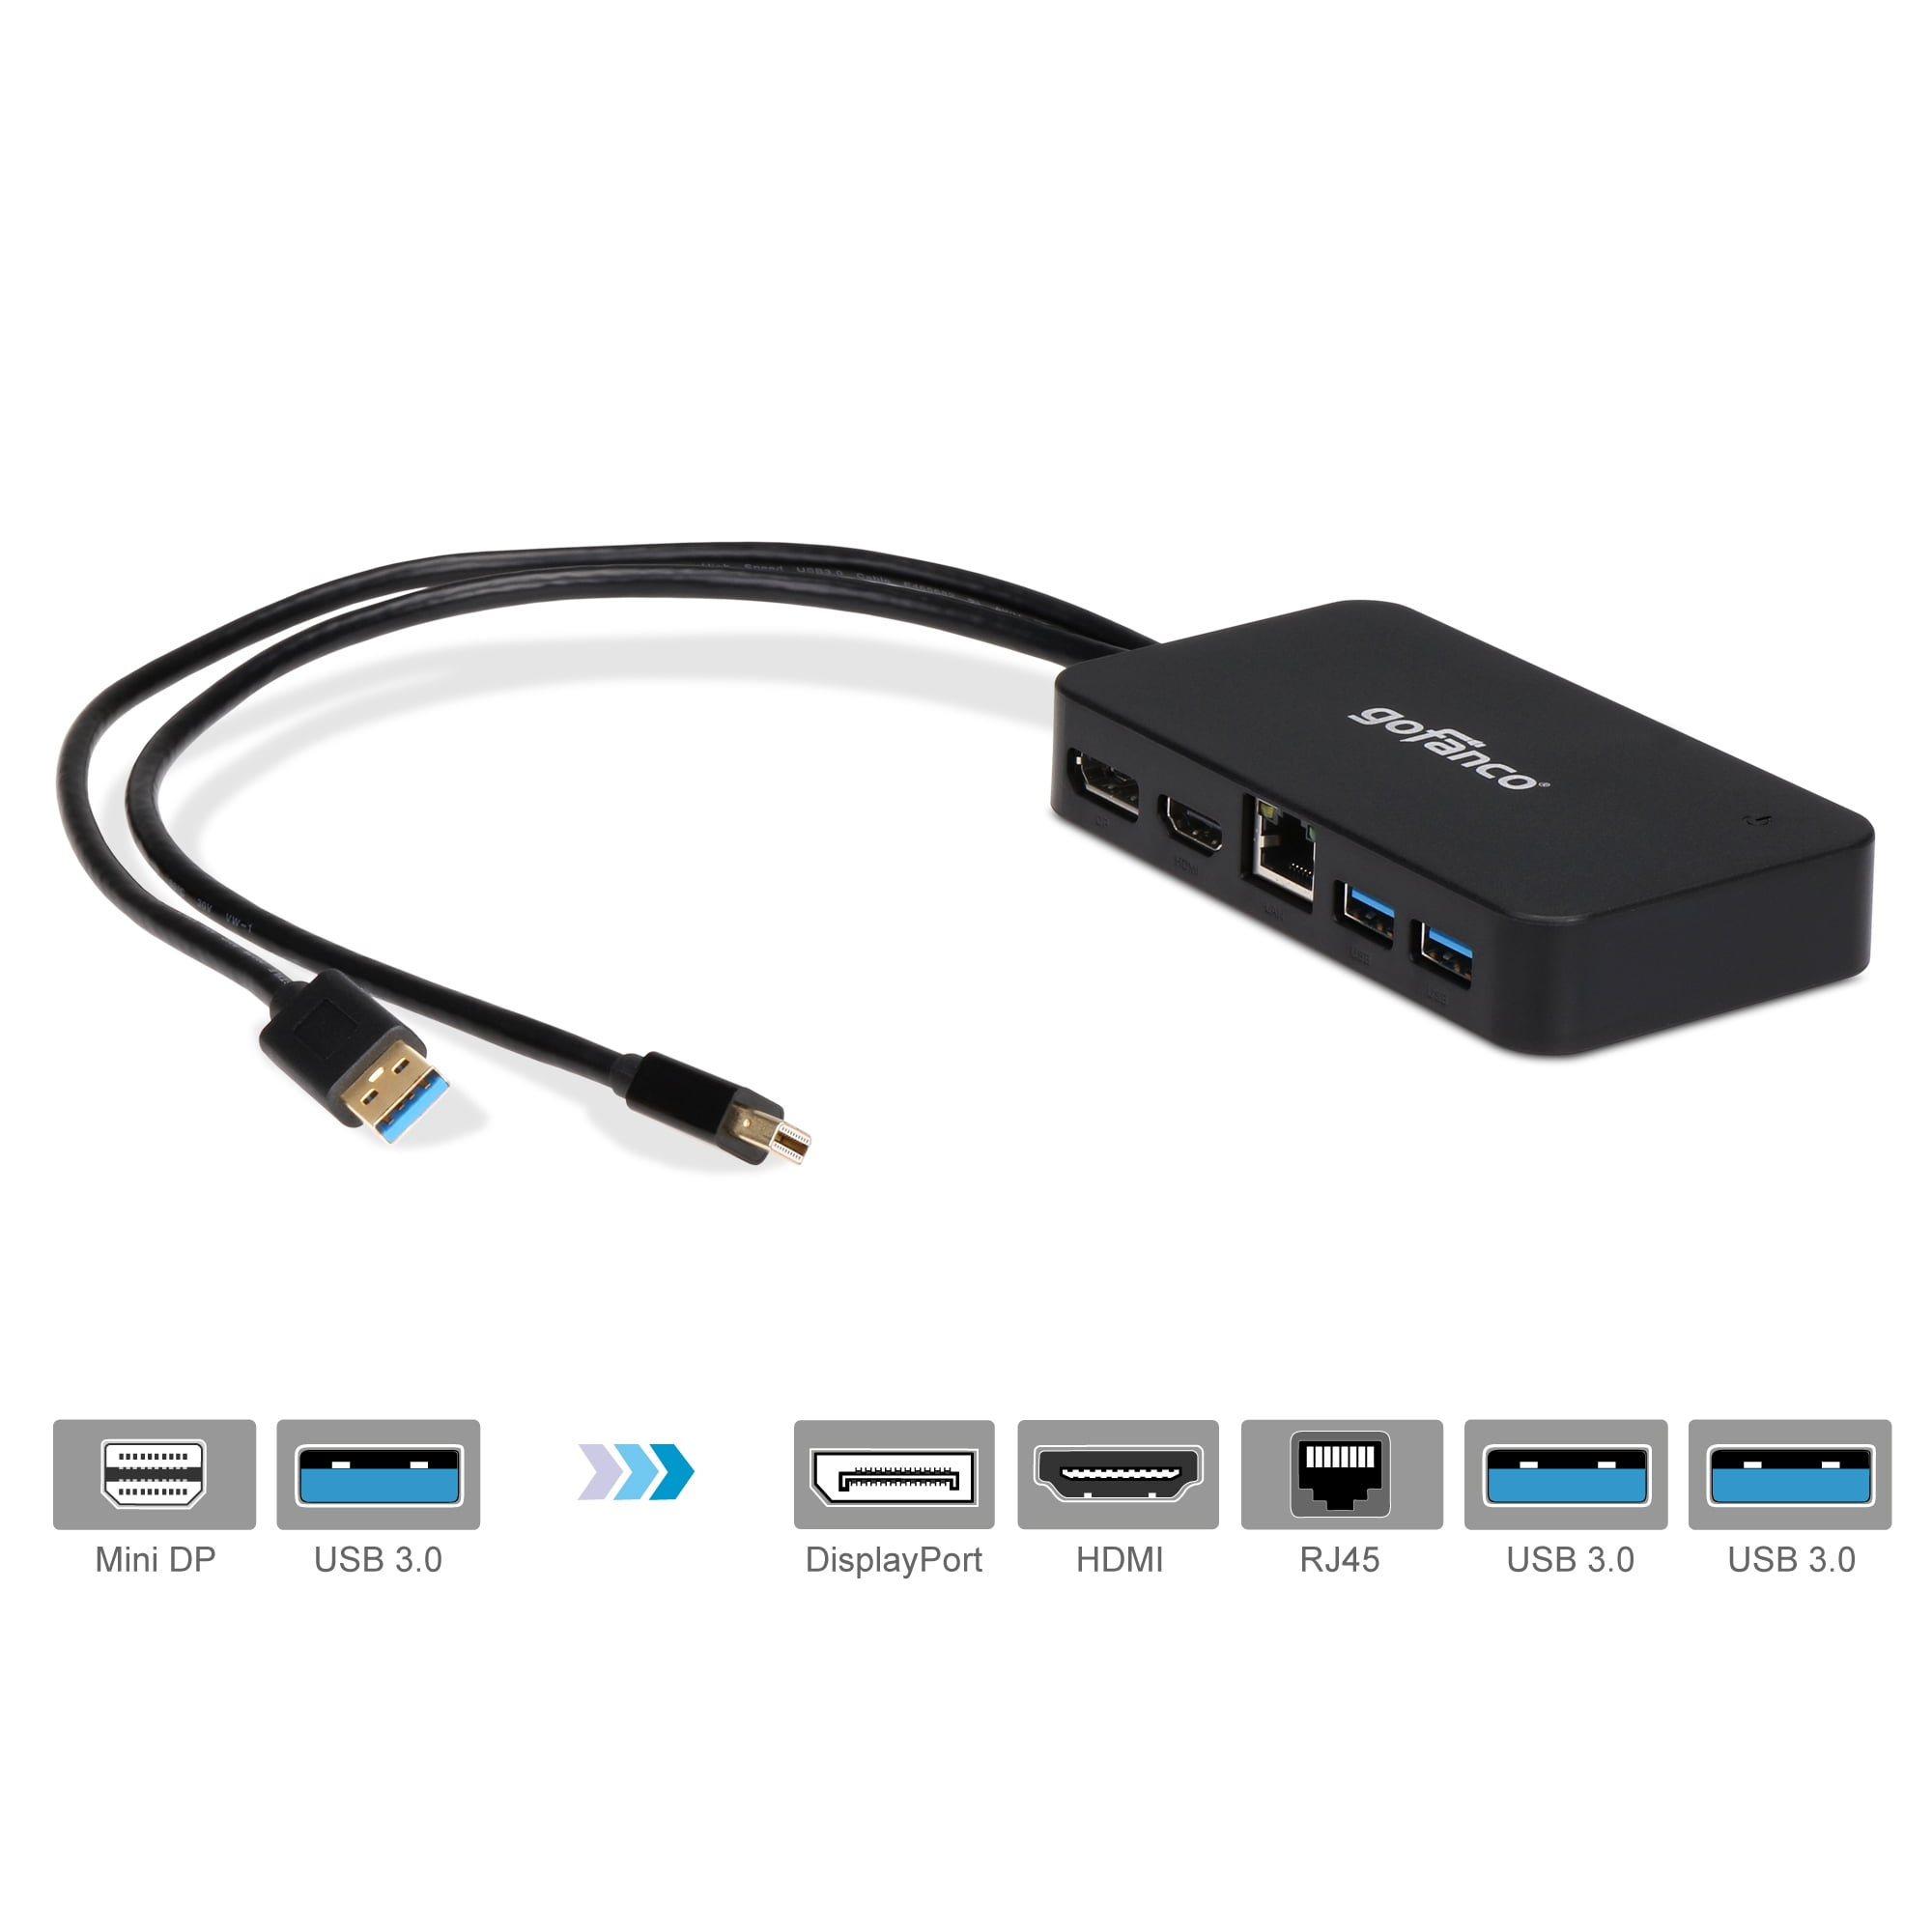 gofanco 2) Video Dock/Docking Station with HDMI, DisplayPort, USB 3.0 Gigabit Ethernet Output for Surface Pro, MacBook and PC - Thunderbolt 2 to DP or HDMI Adapter Hub - Walmart.com